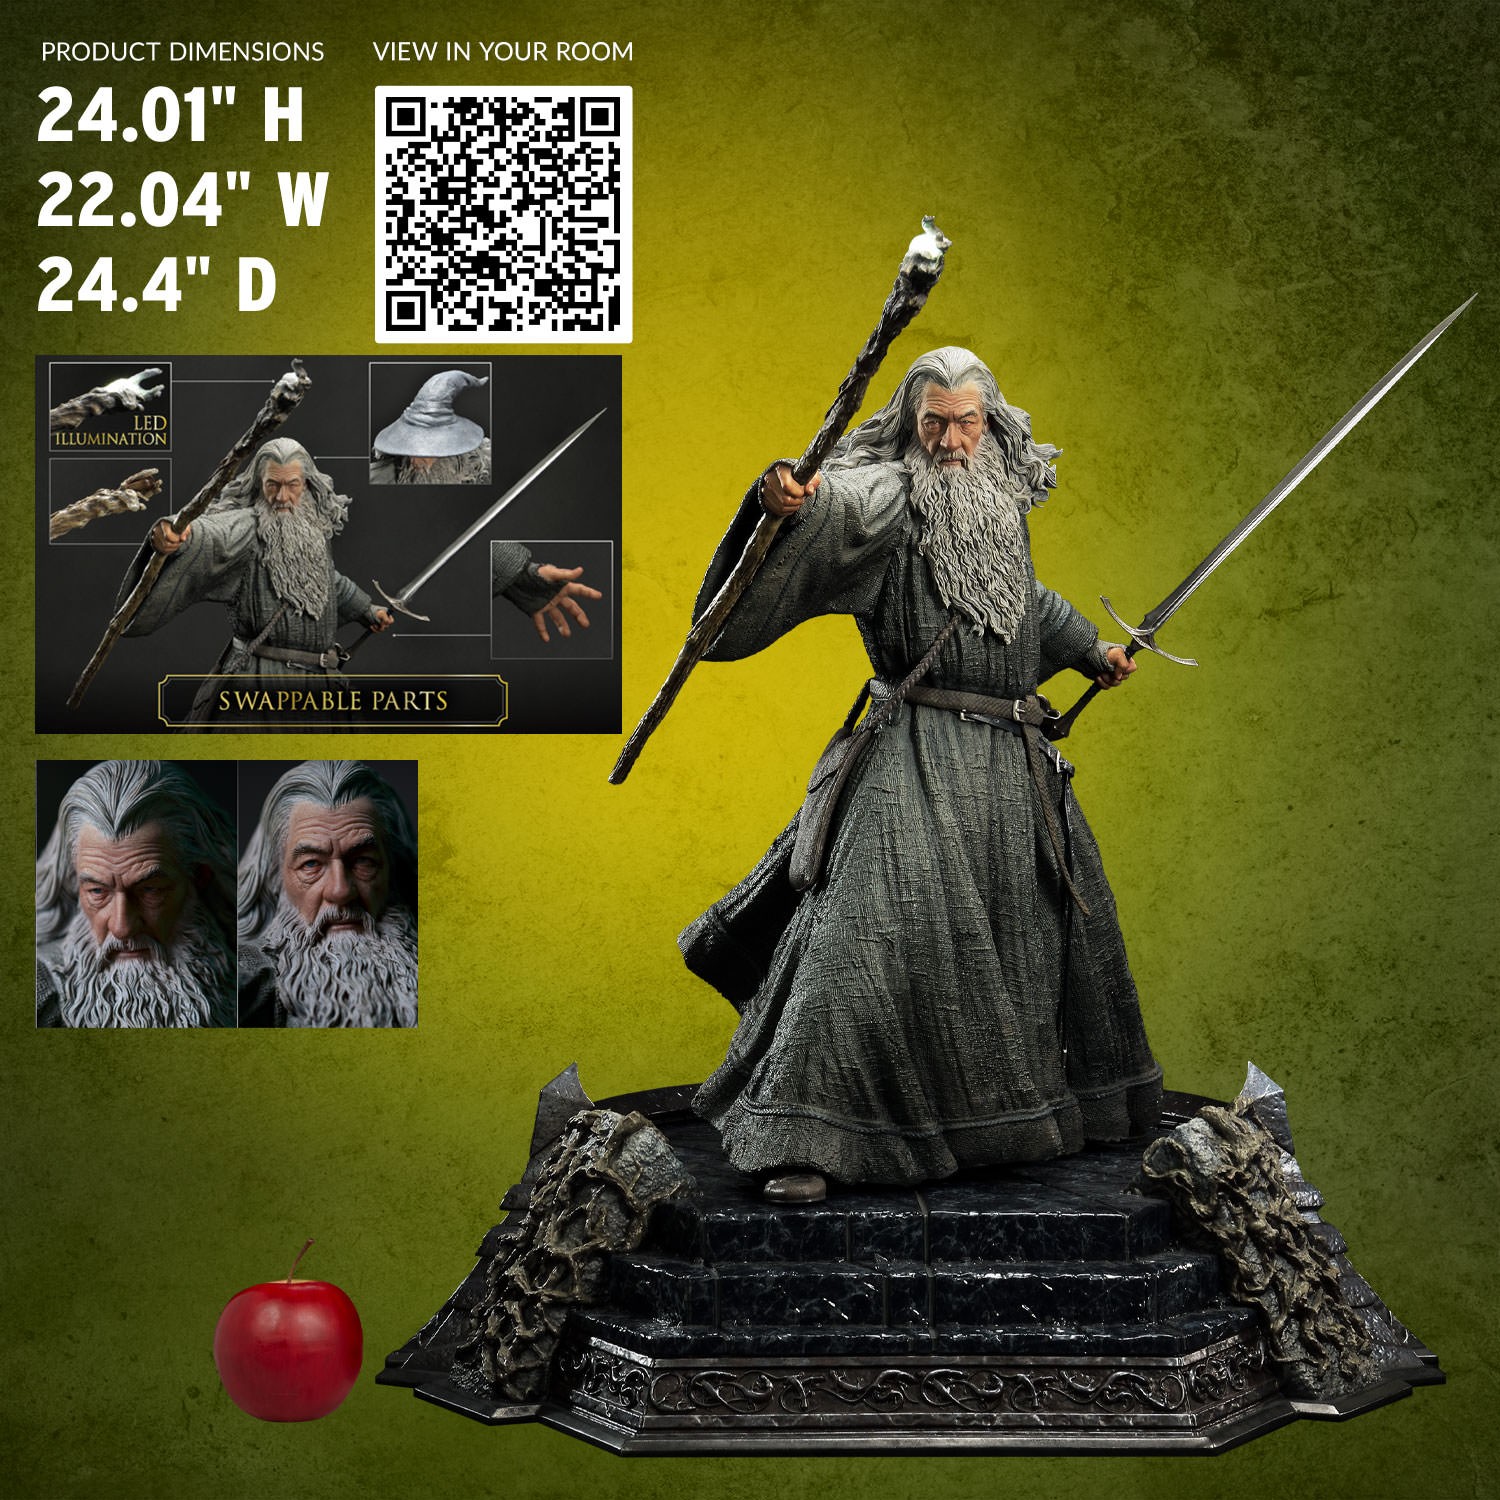 GANDALF THE GREY 1/4 Scale Statue Gandalf-the-grey_the-lord-of-the-rings_scale_64c408f7ec01c